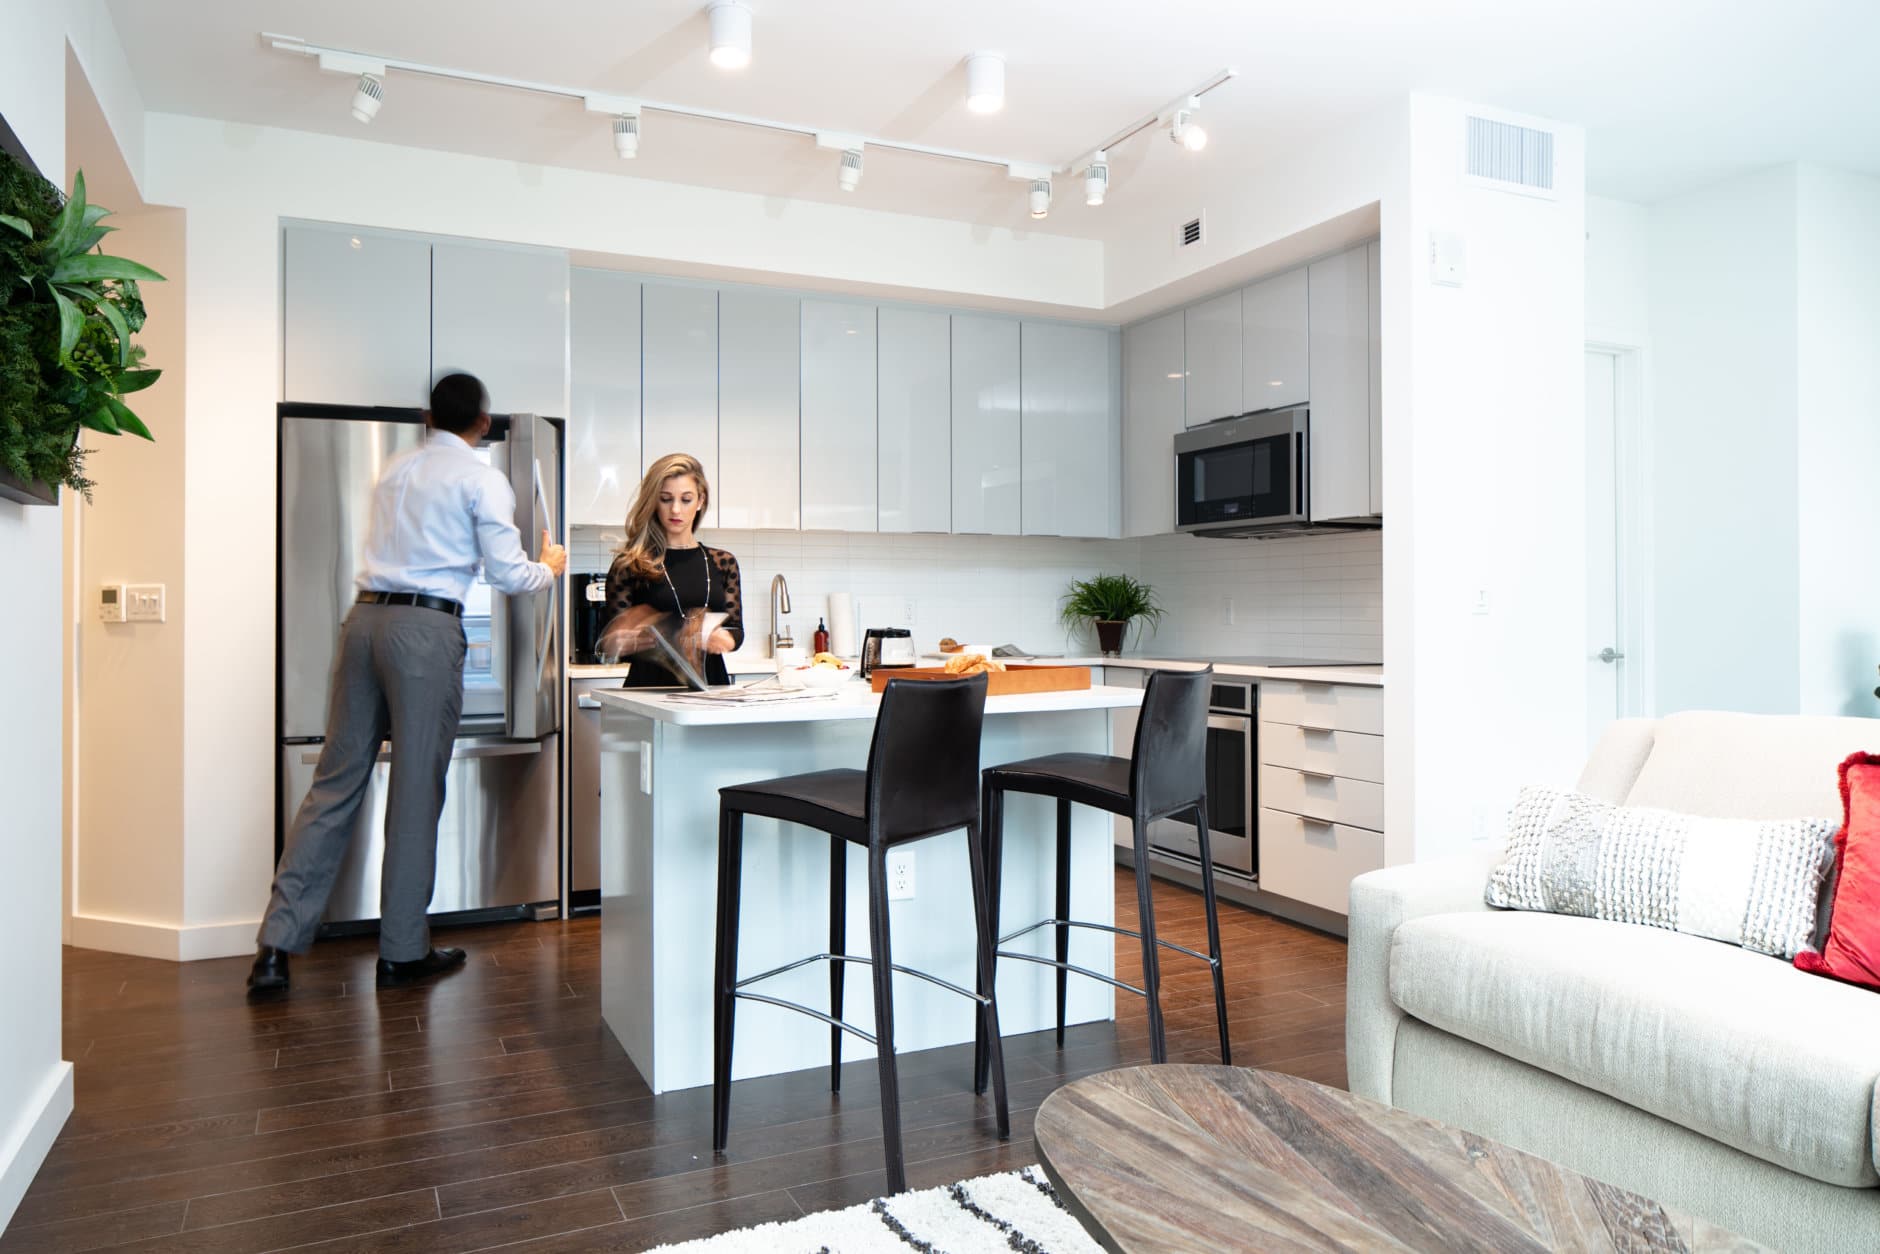 D.C.-based startup WhyHotel, which rents out units in newly-constructed apartment buildings as hotel stays until the landlord leases them, has raised funds for expansion and will add three new Washington area buildings to its room rental list. (Courtesy WhyHotel)